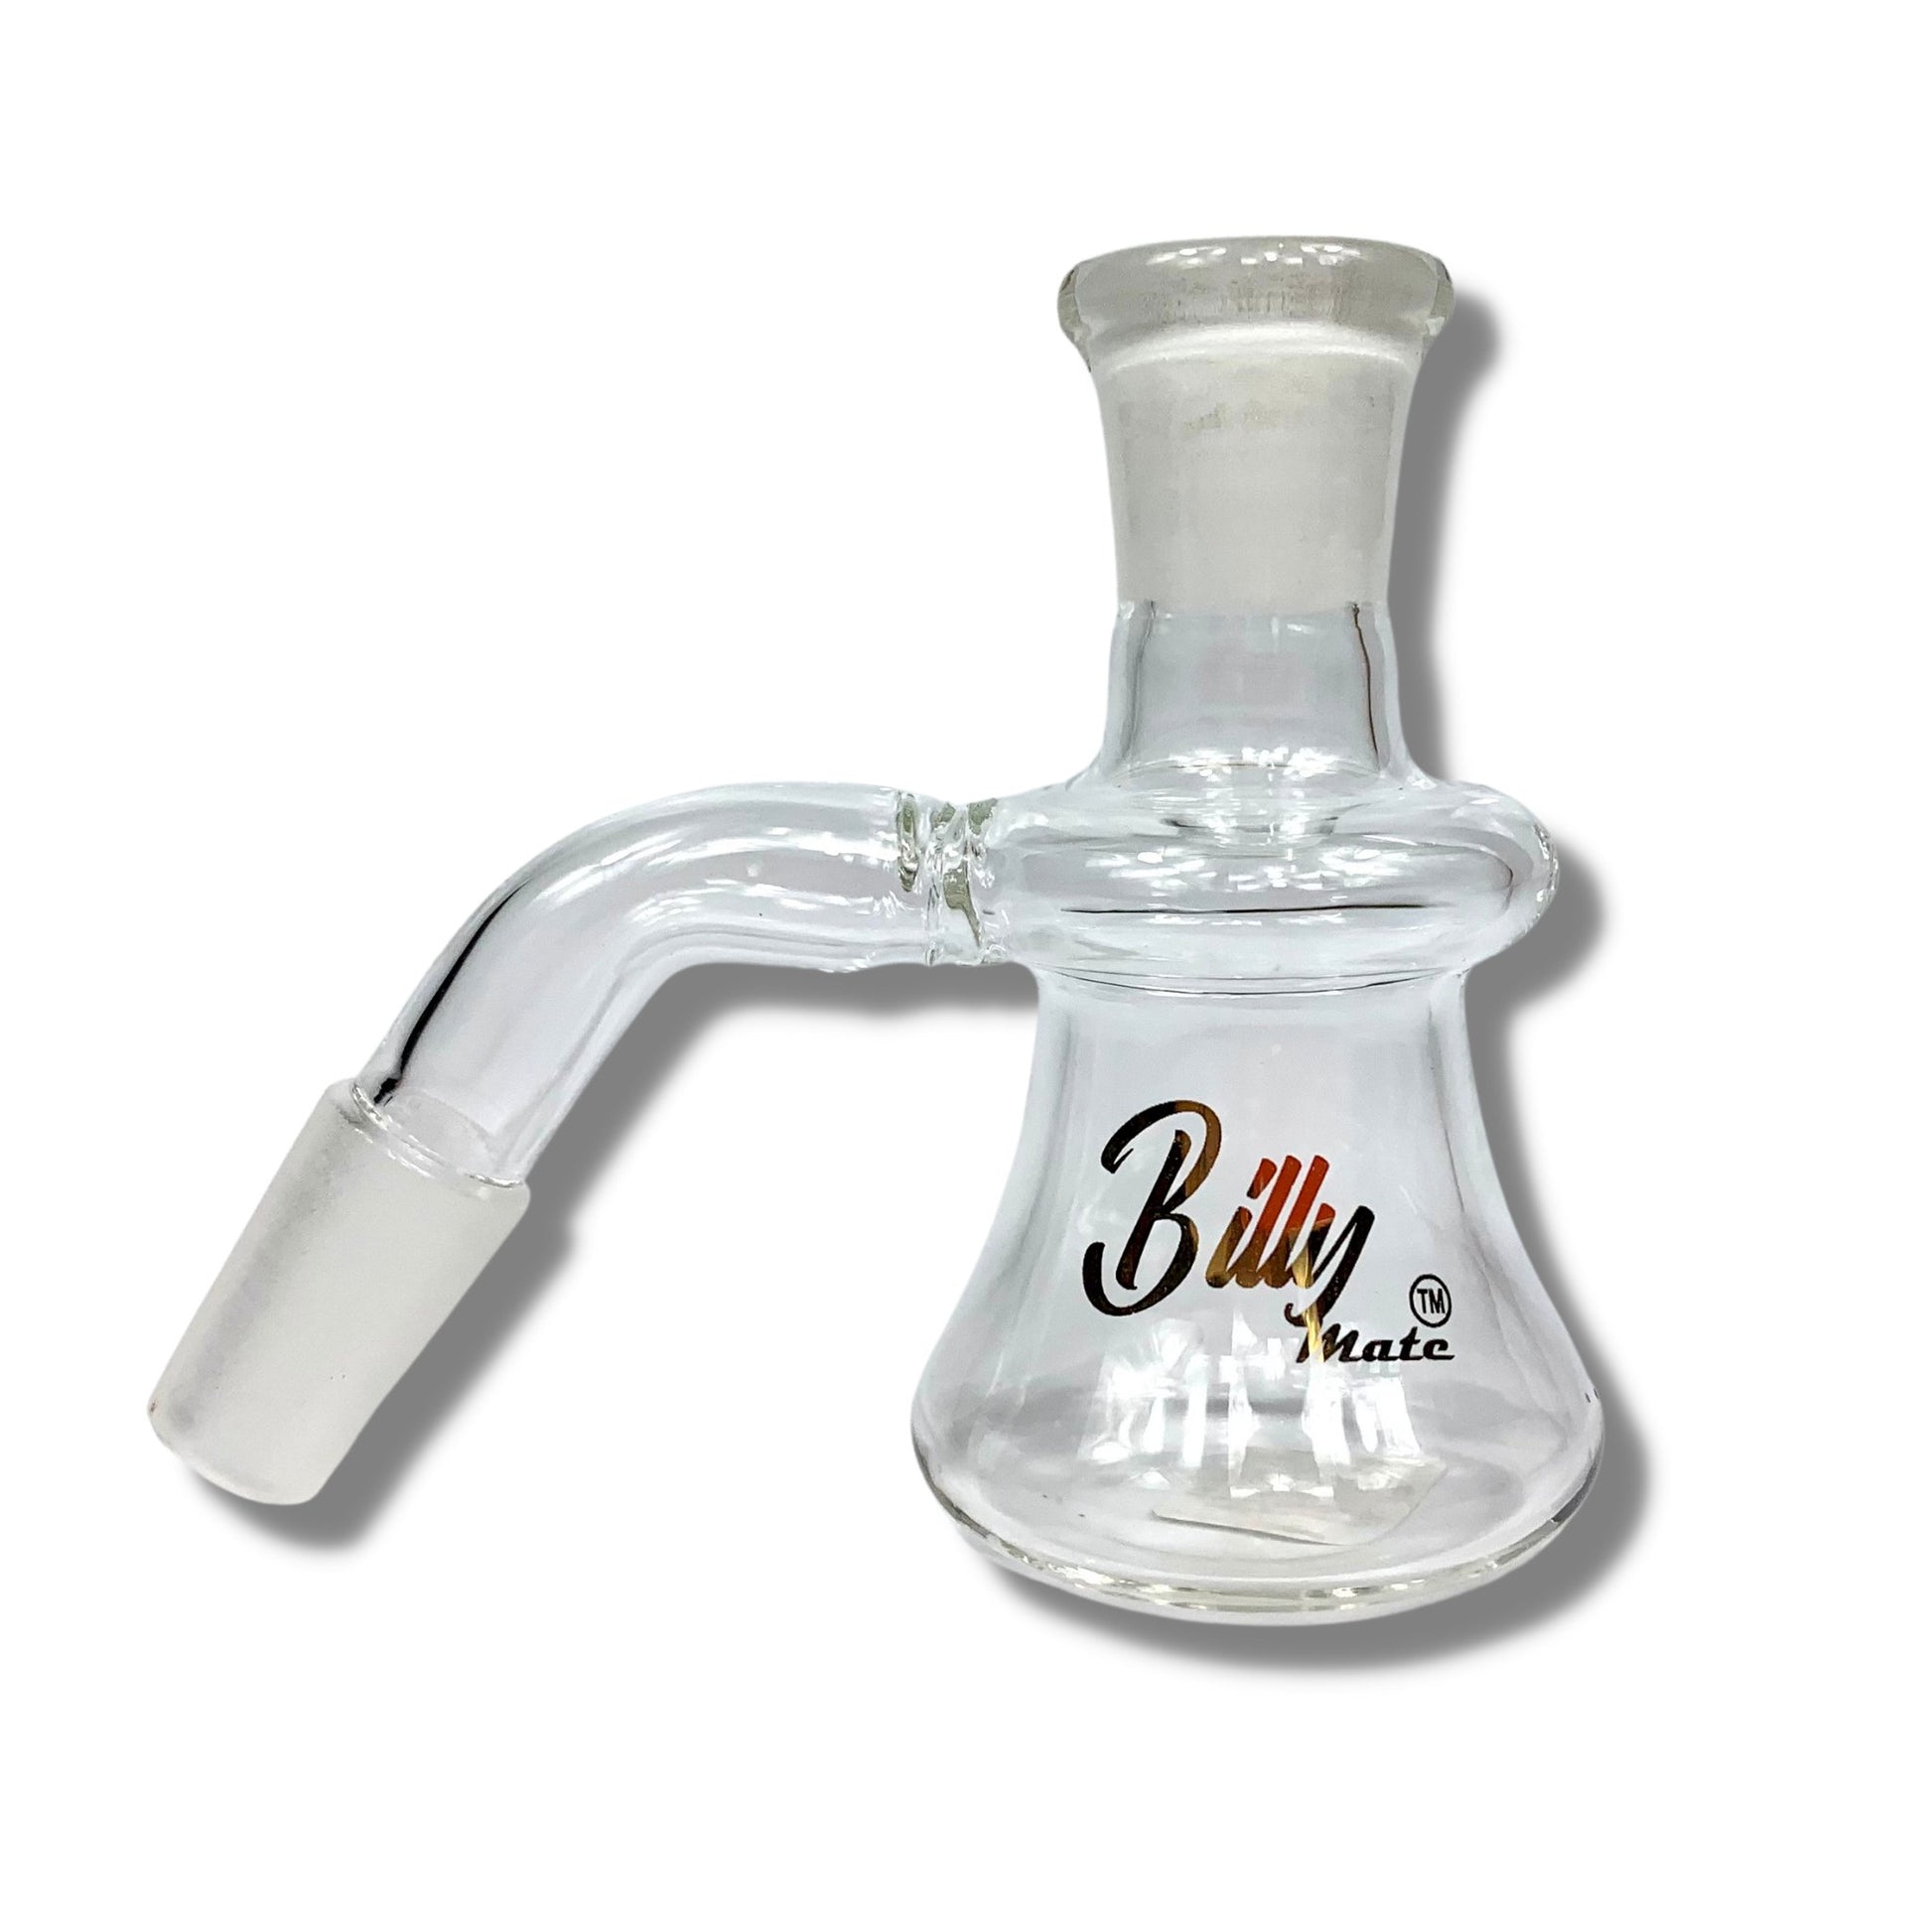 Billy Mate 45 degree Dry Ash Catcher 14mm male - The Bong Baron